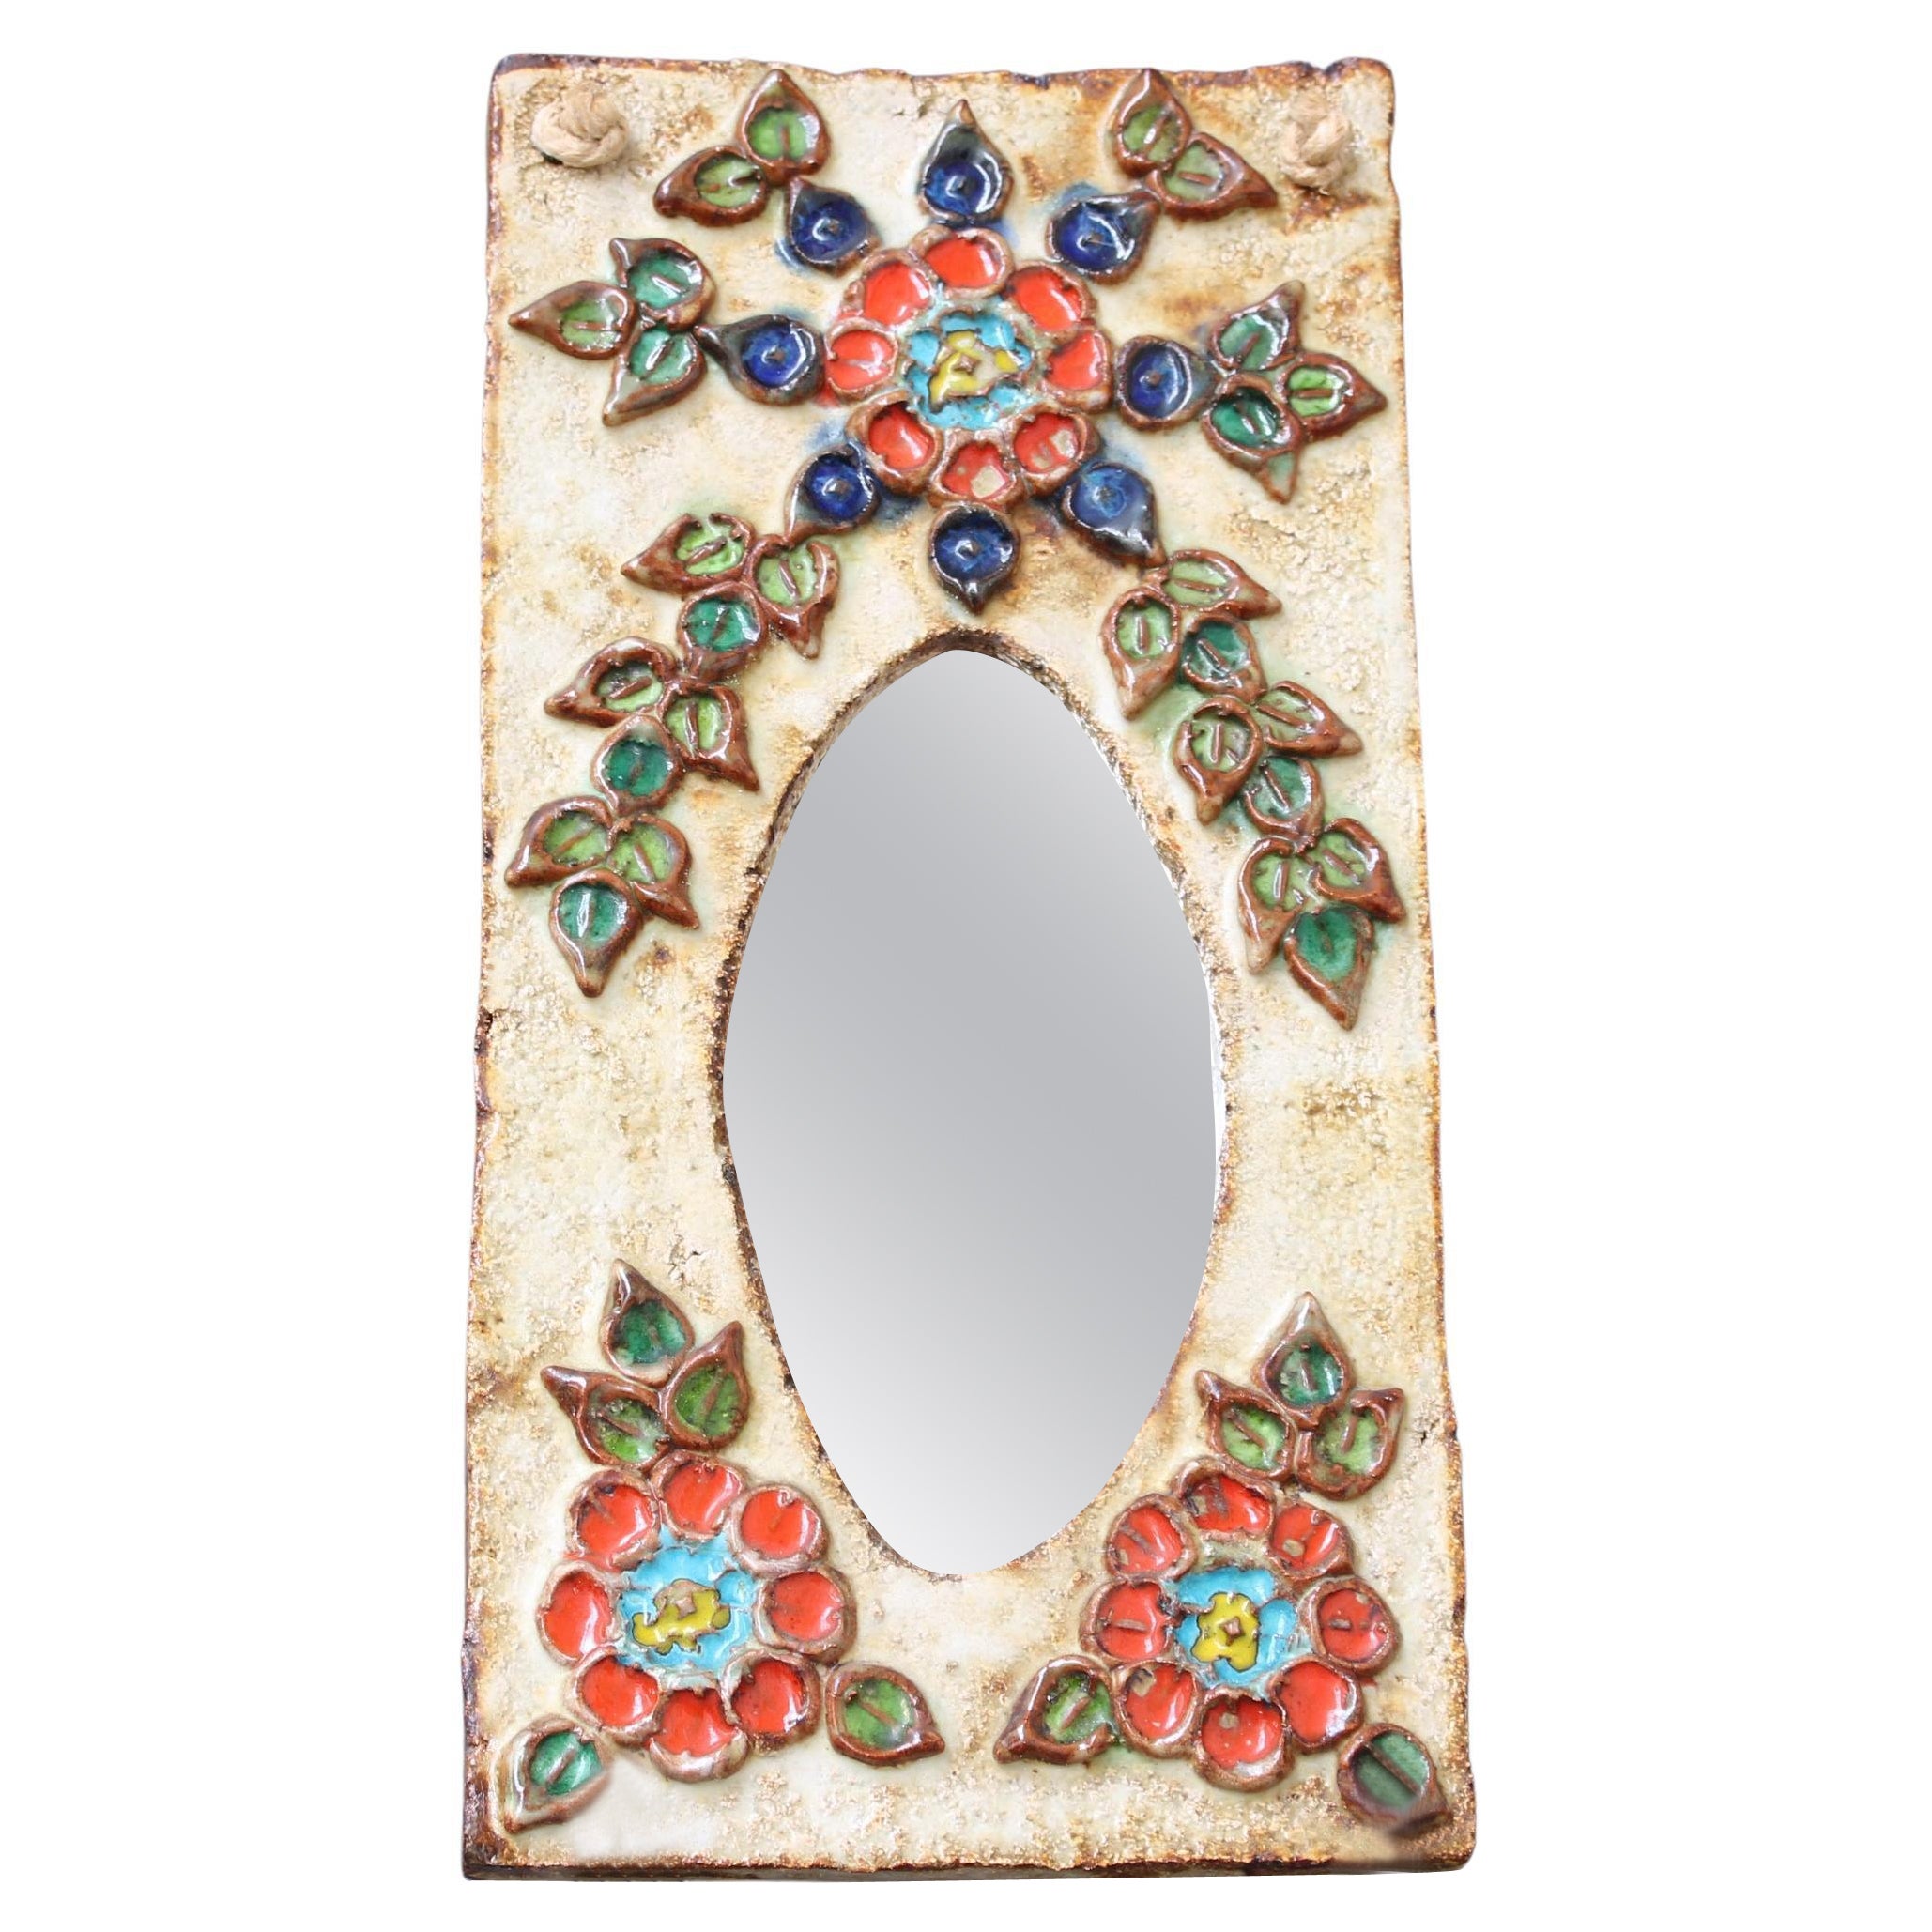 Vintage French Ceramic Wall Mirror with Flower Motif by La Roue, 'circa 1960s' For Sale